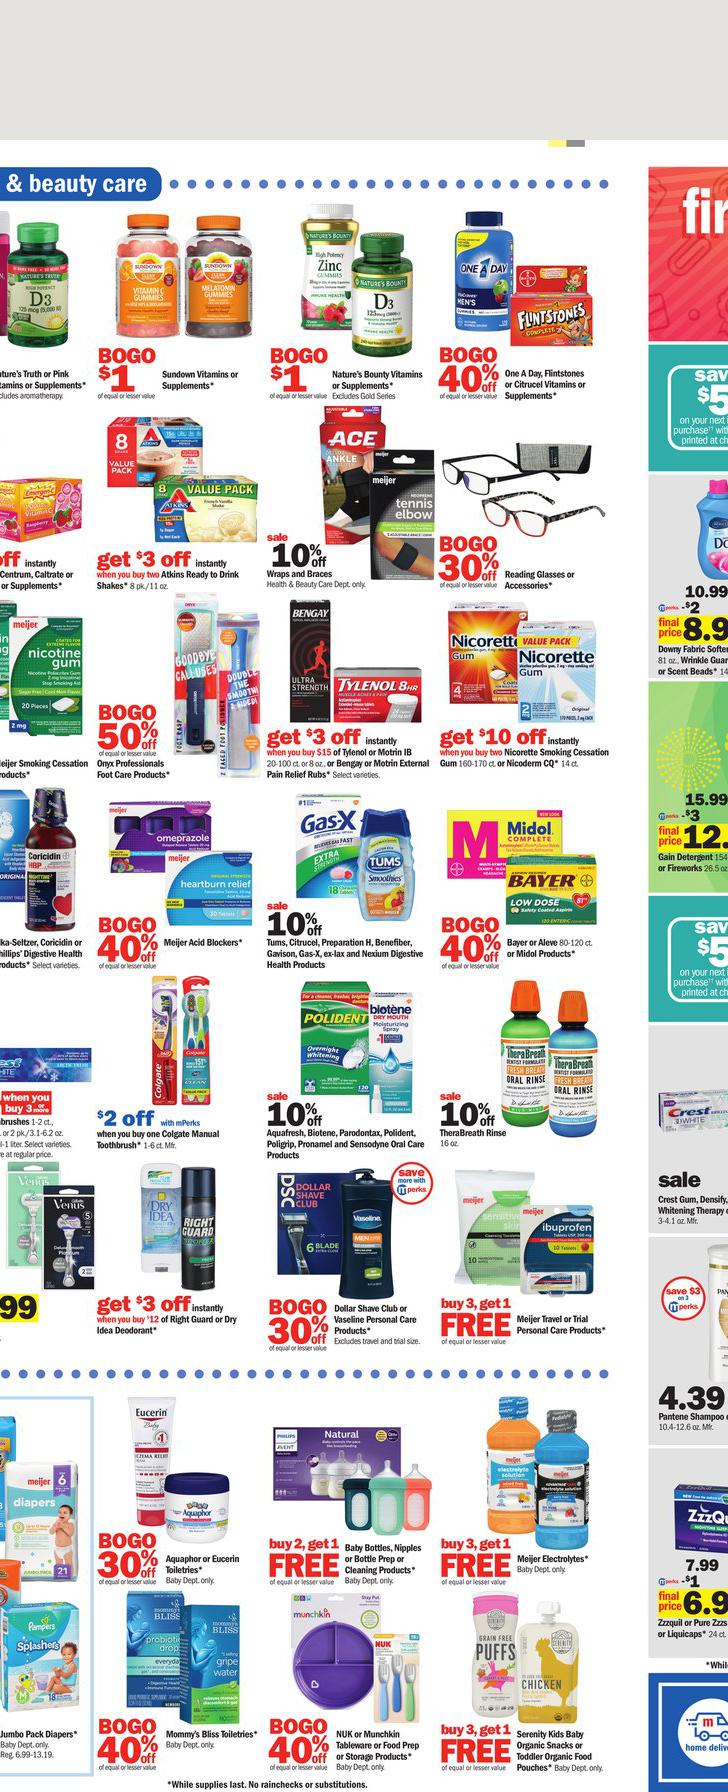 31.07.2022 Meijer ad 15. page